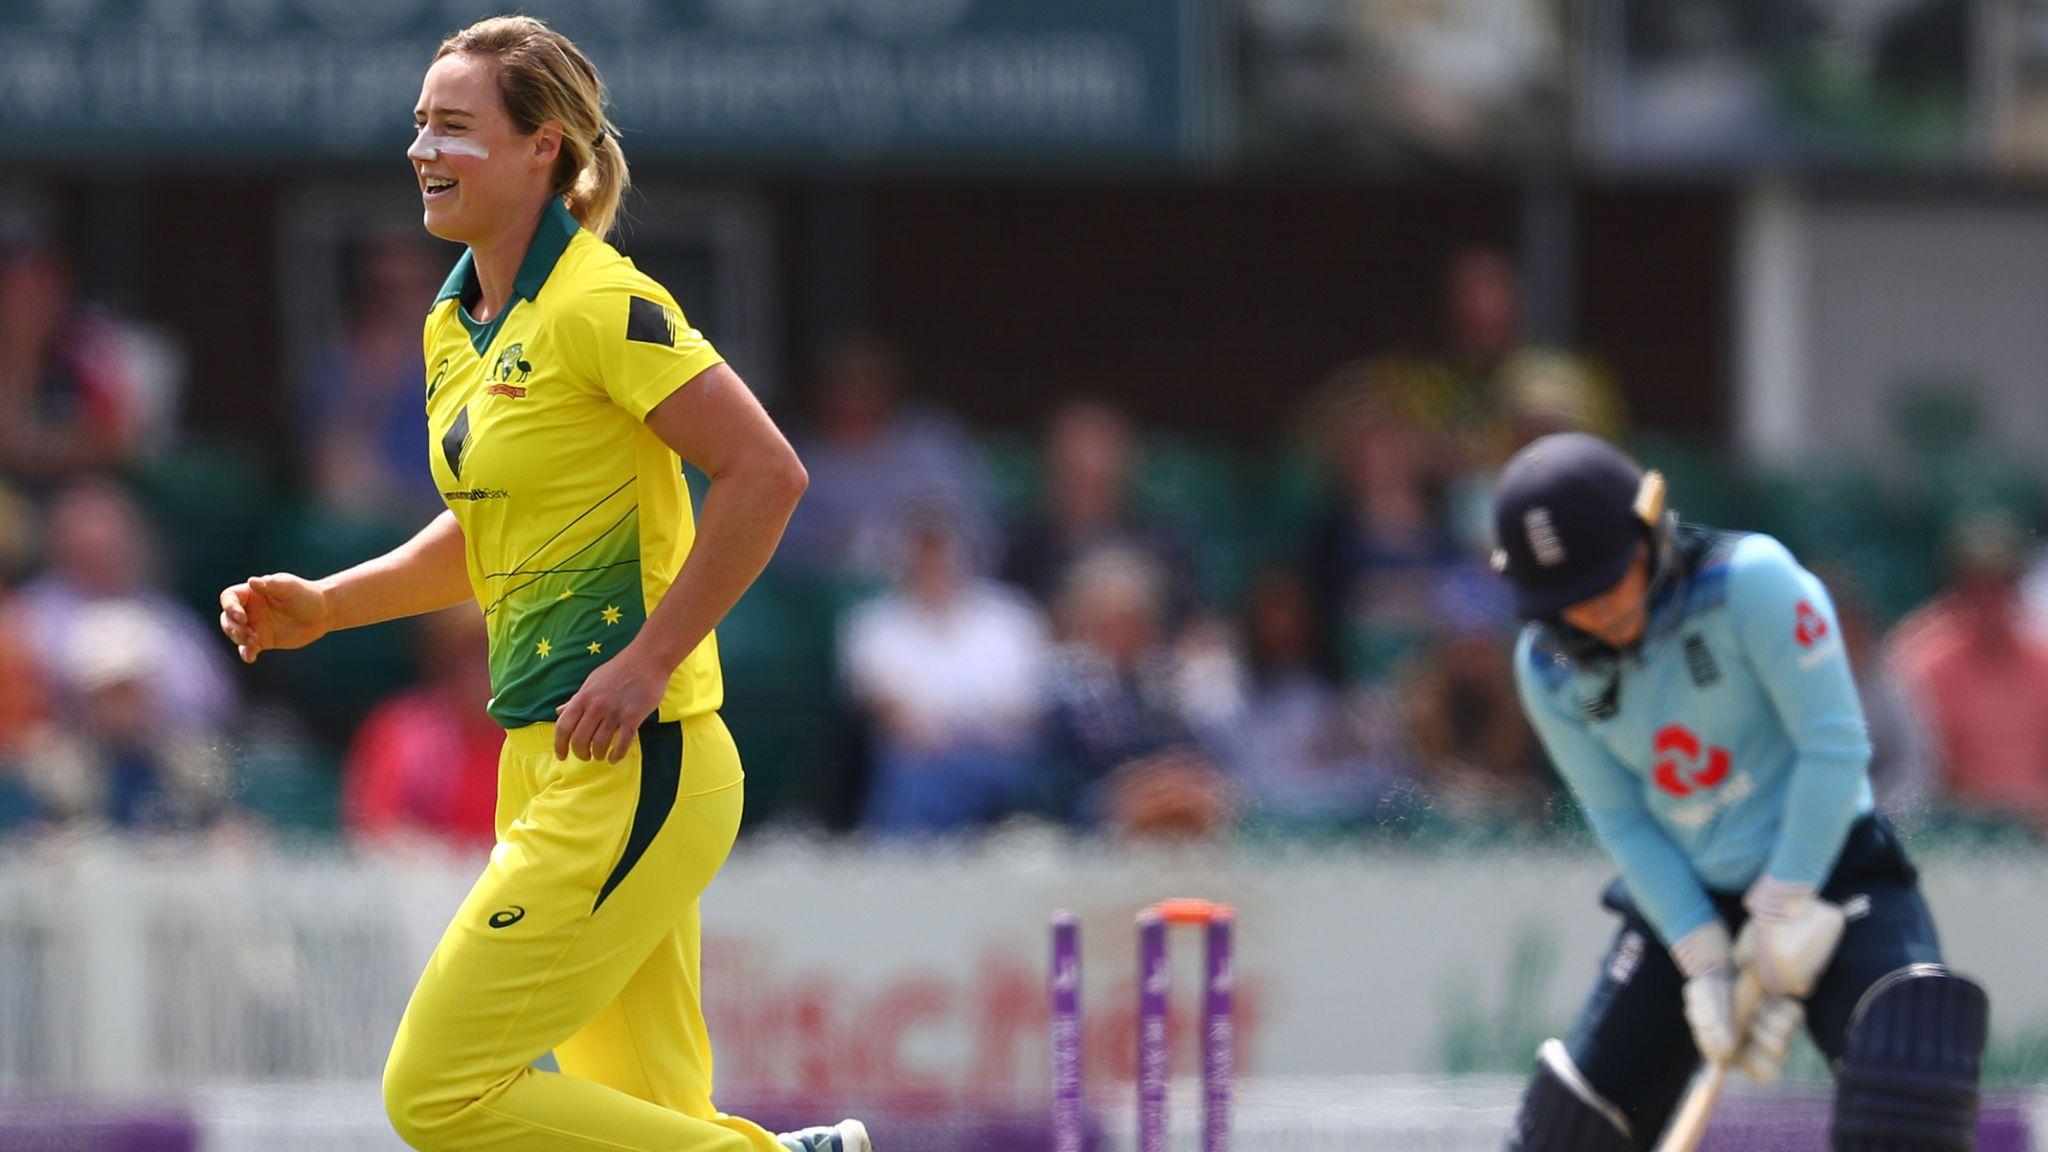 England have mental and technical issues against Ellyse Perry, says